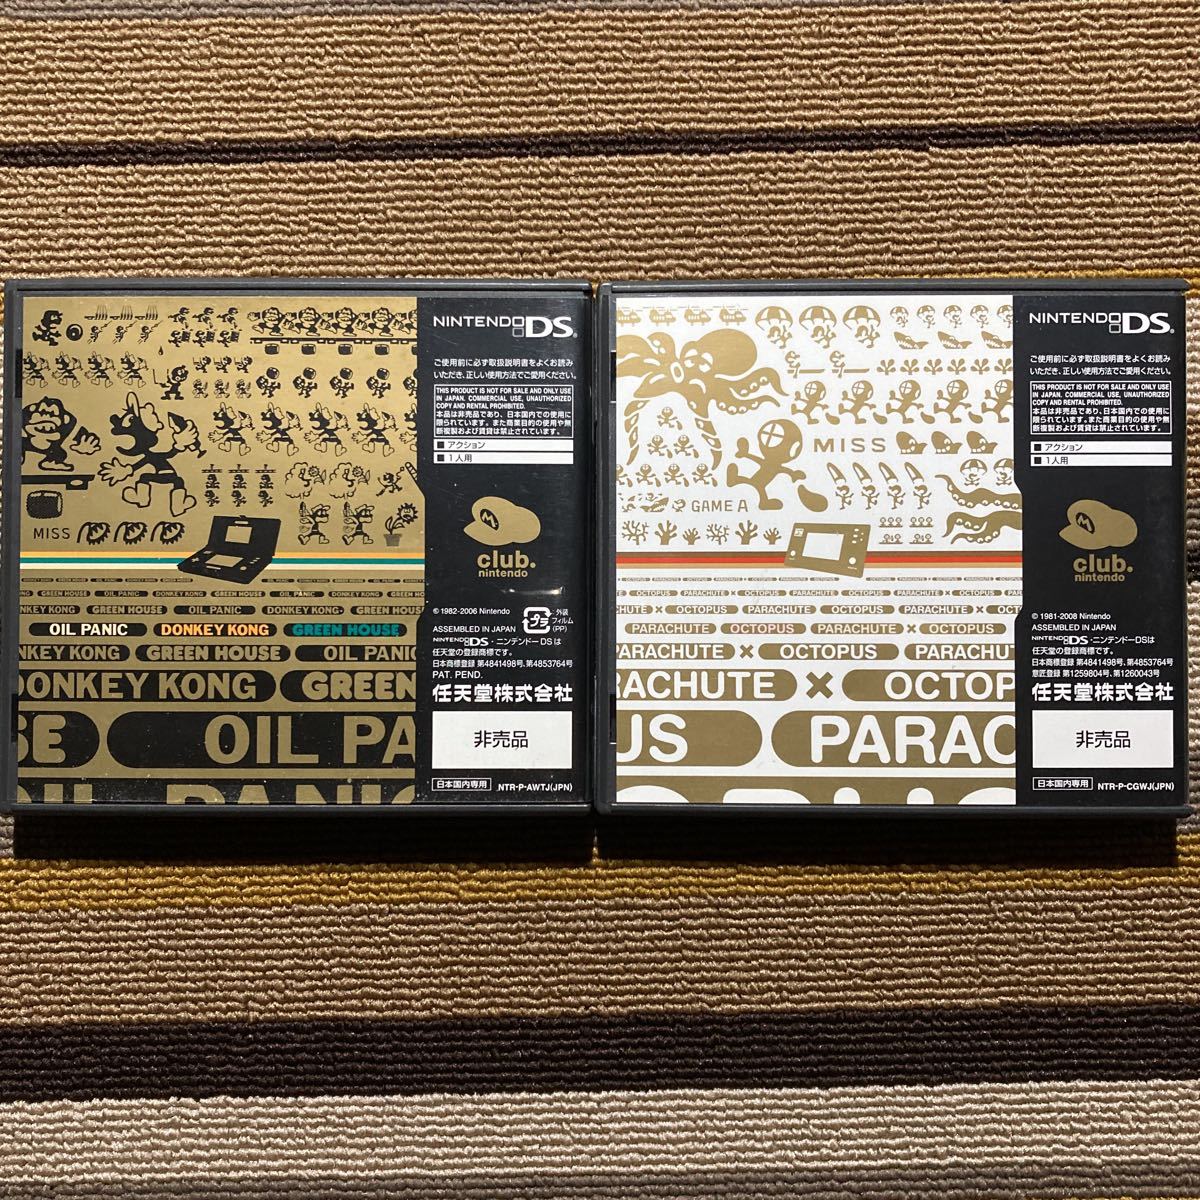 DS ゲーム&ウォッチコレクション GAME&WATCH COLLECTION 2本セット